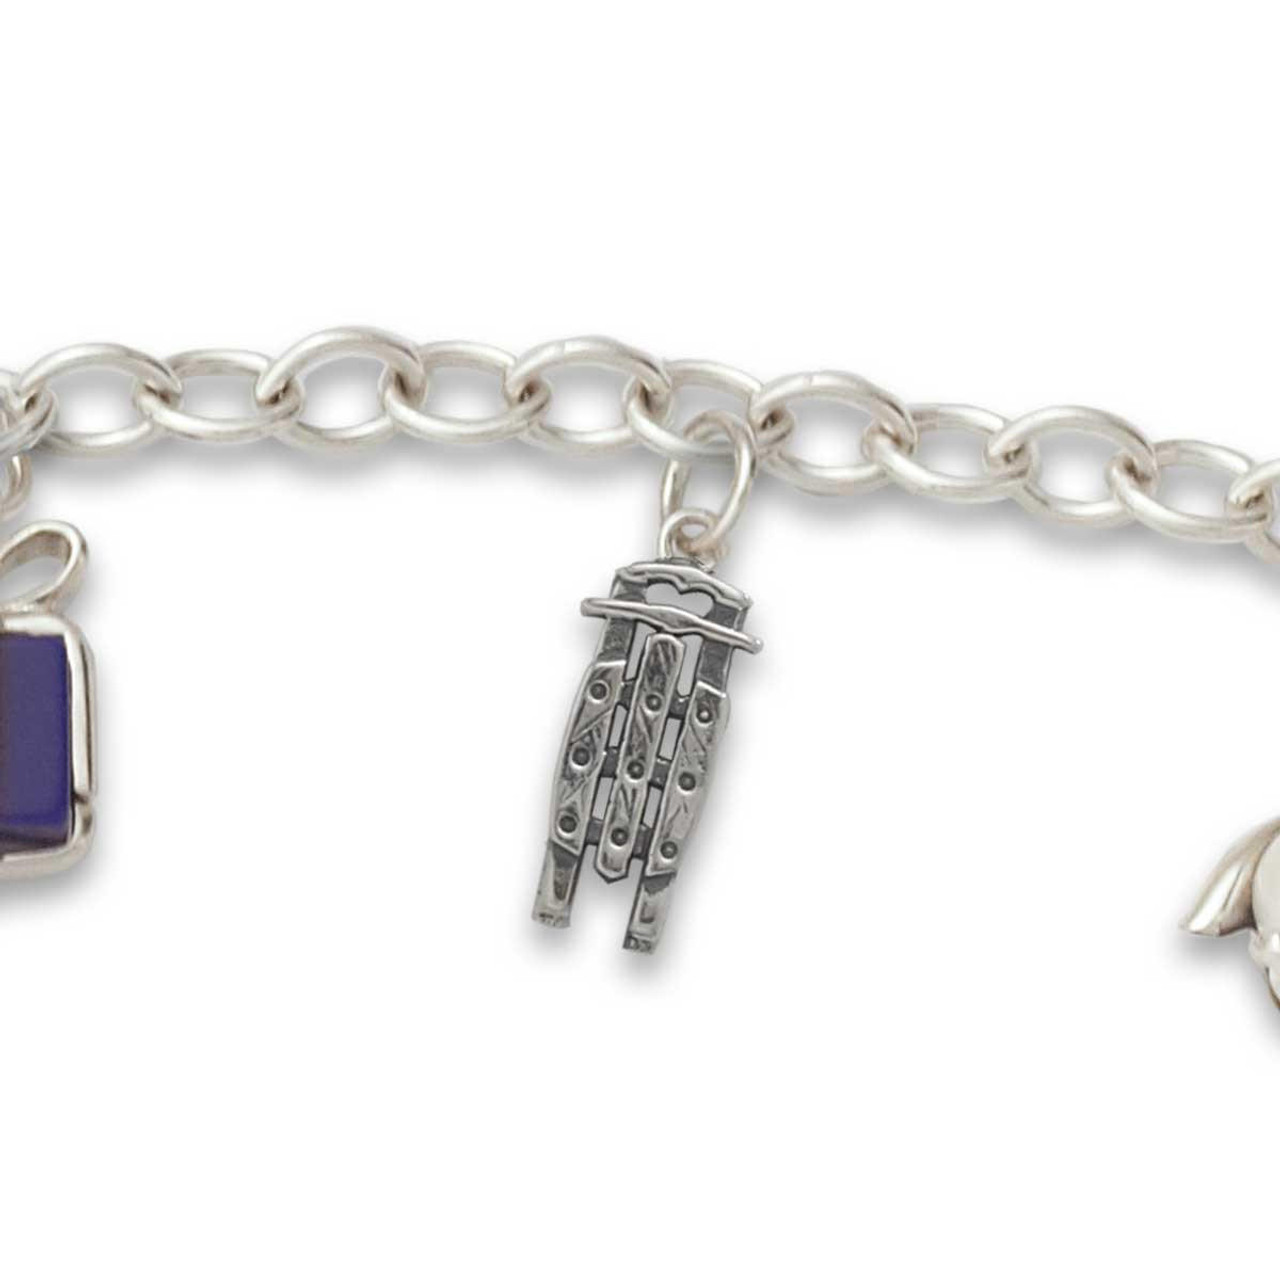 Check out our clever Sterling Silver Charm Bracelet - J.H. Breakell and Co.